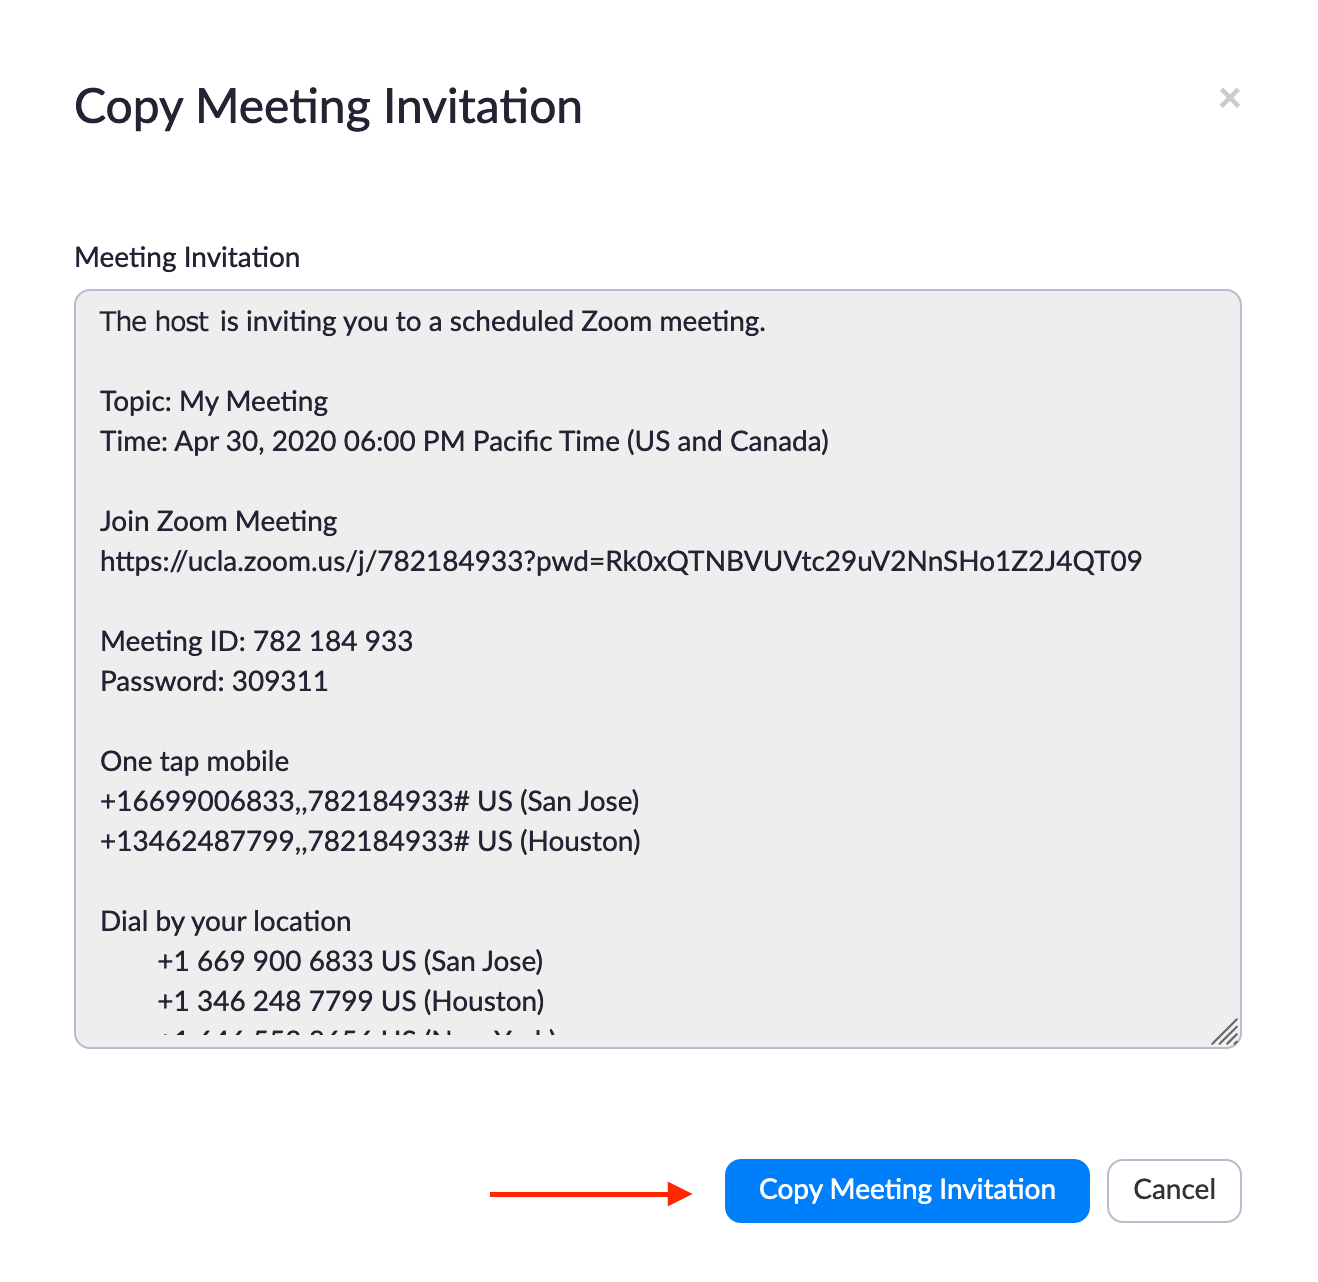 Copy the meeting invitation and post at CCLE